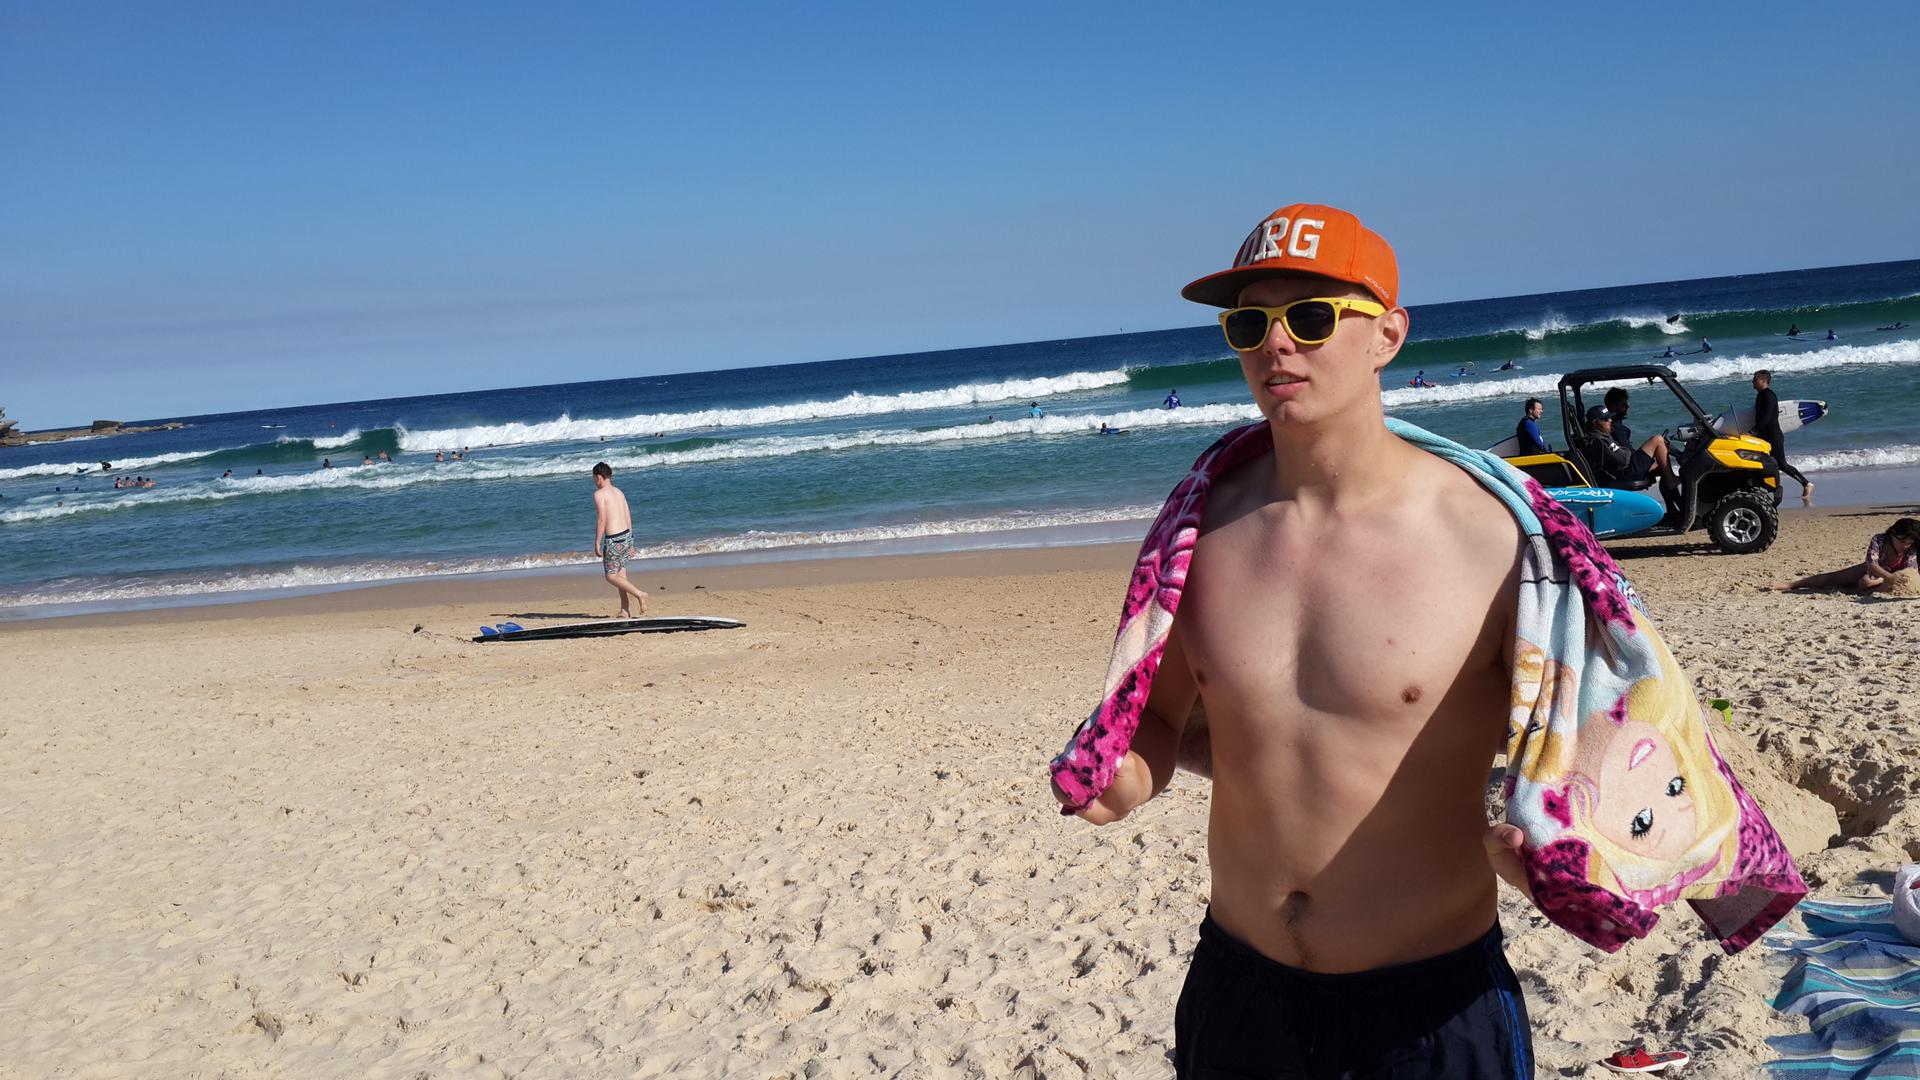 Day 21: The hottest guy in the Bondi beach.